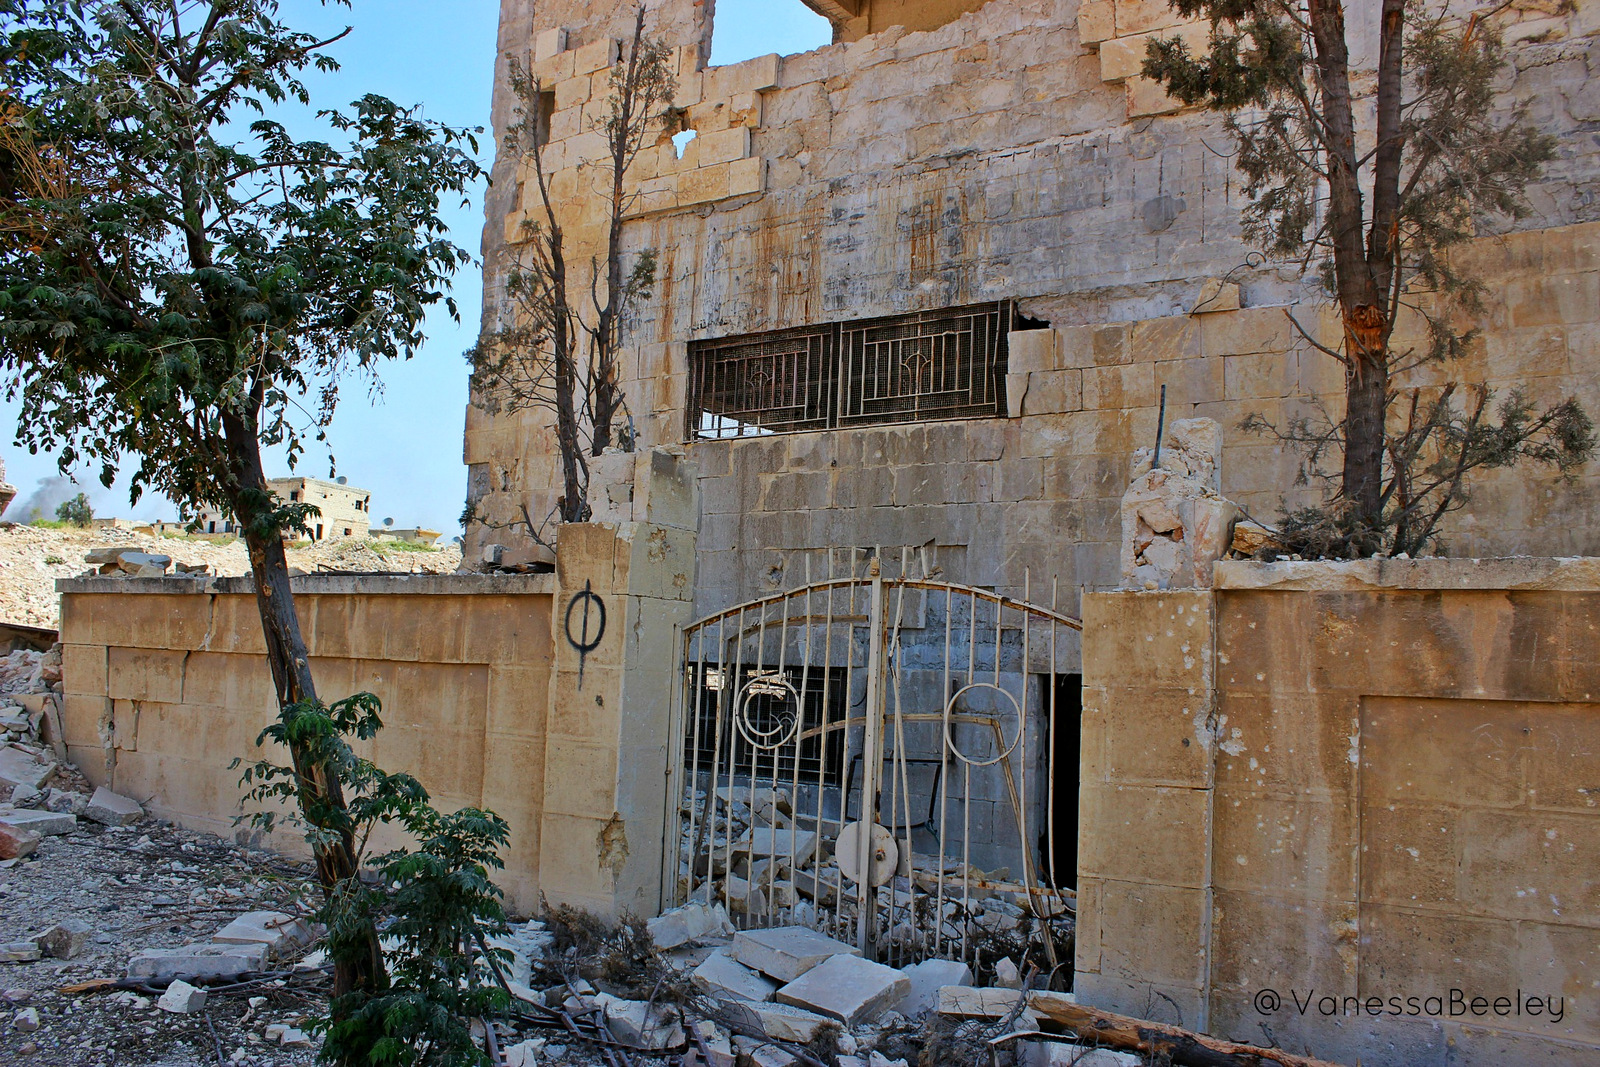 Remains of the headquarters of the 16th Division of the Free Syrian Army. We were told to be careful walking around inside because of the risk of uncleared IEDs that are left behind when terrorists flee an area they have occupied for any length of time. (Photo by Vanessa Beeley)